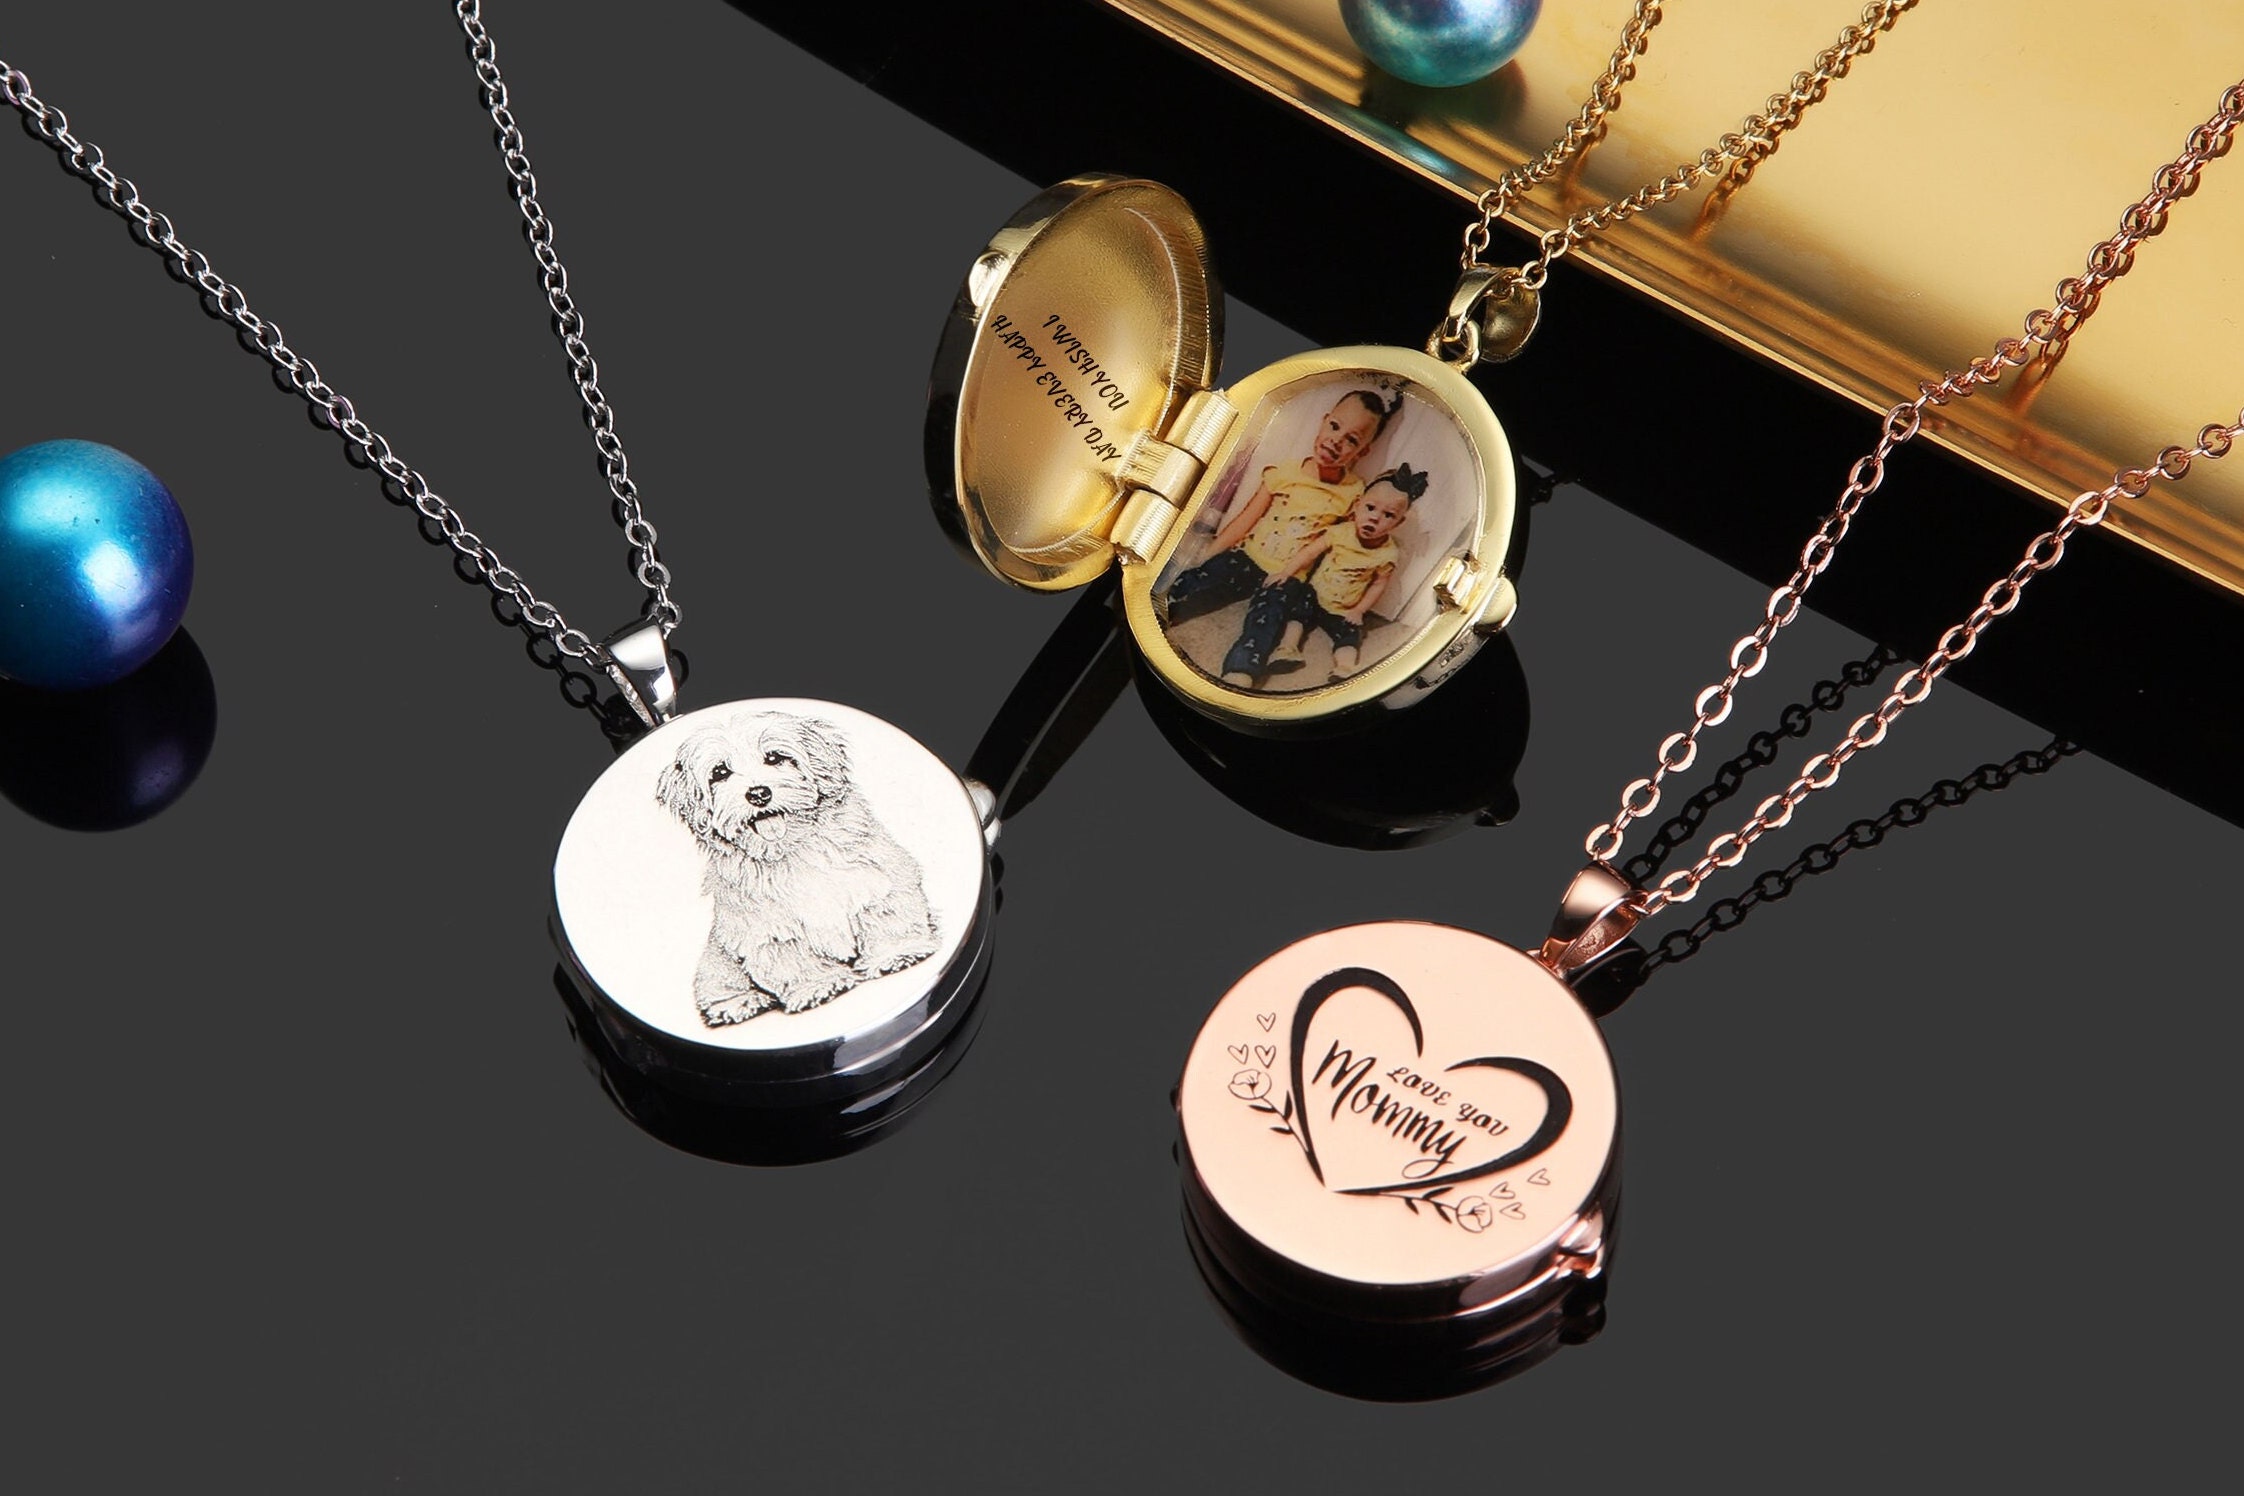 Oval Personalized Locket Necklace - Holds Two Pictures | Tiny Tags